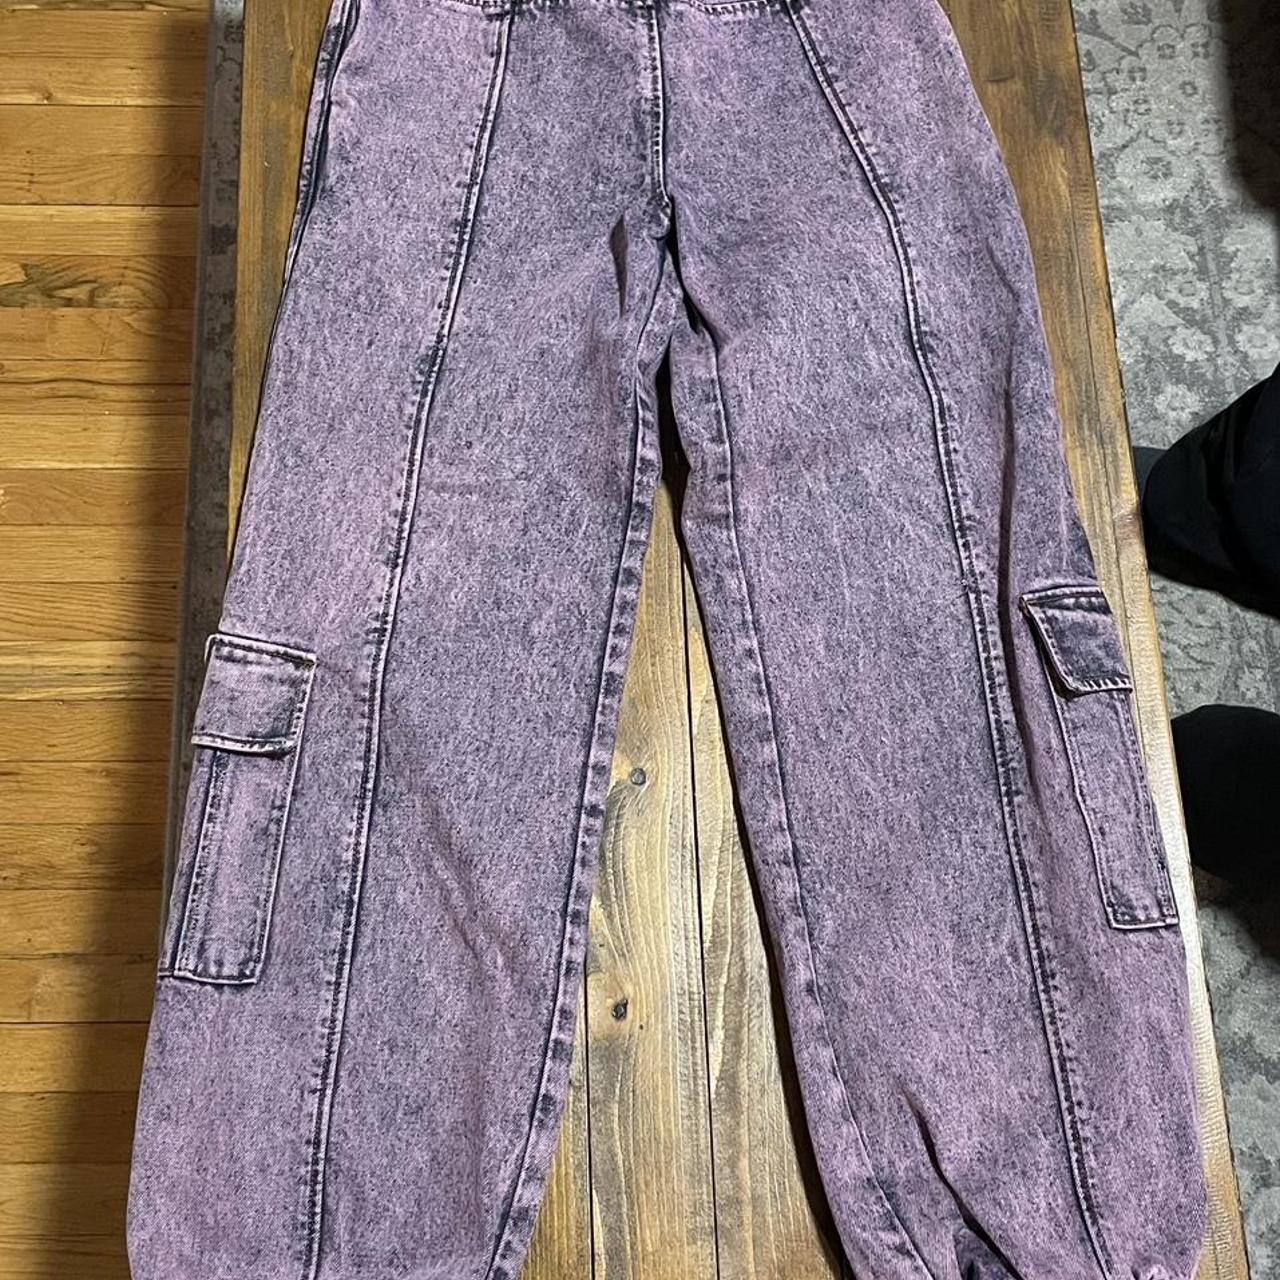 LIBERAL YOUTH MINISTRY Vintage pants